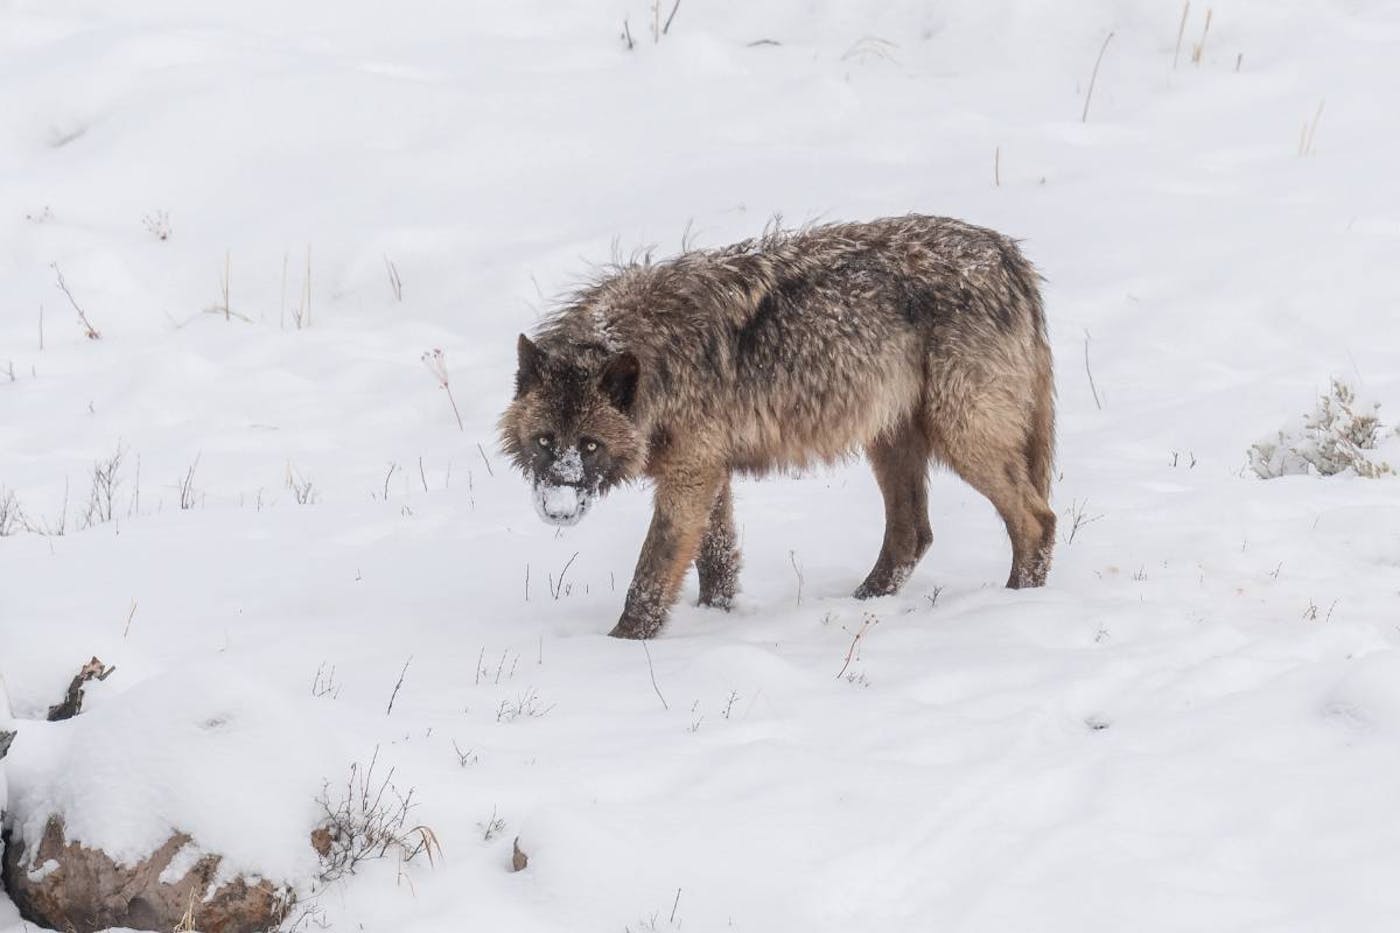 Protecting Imperiled Wolves in the Northern Rockies Region Through Compassionate Conservation